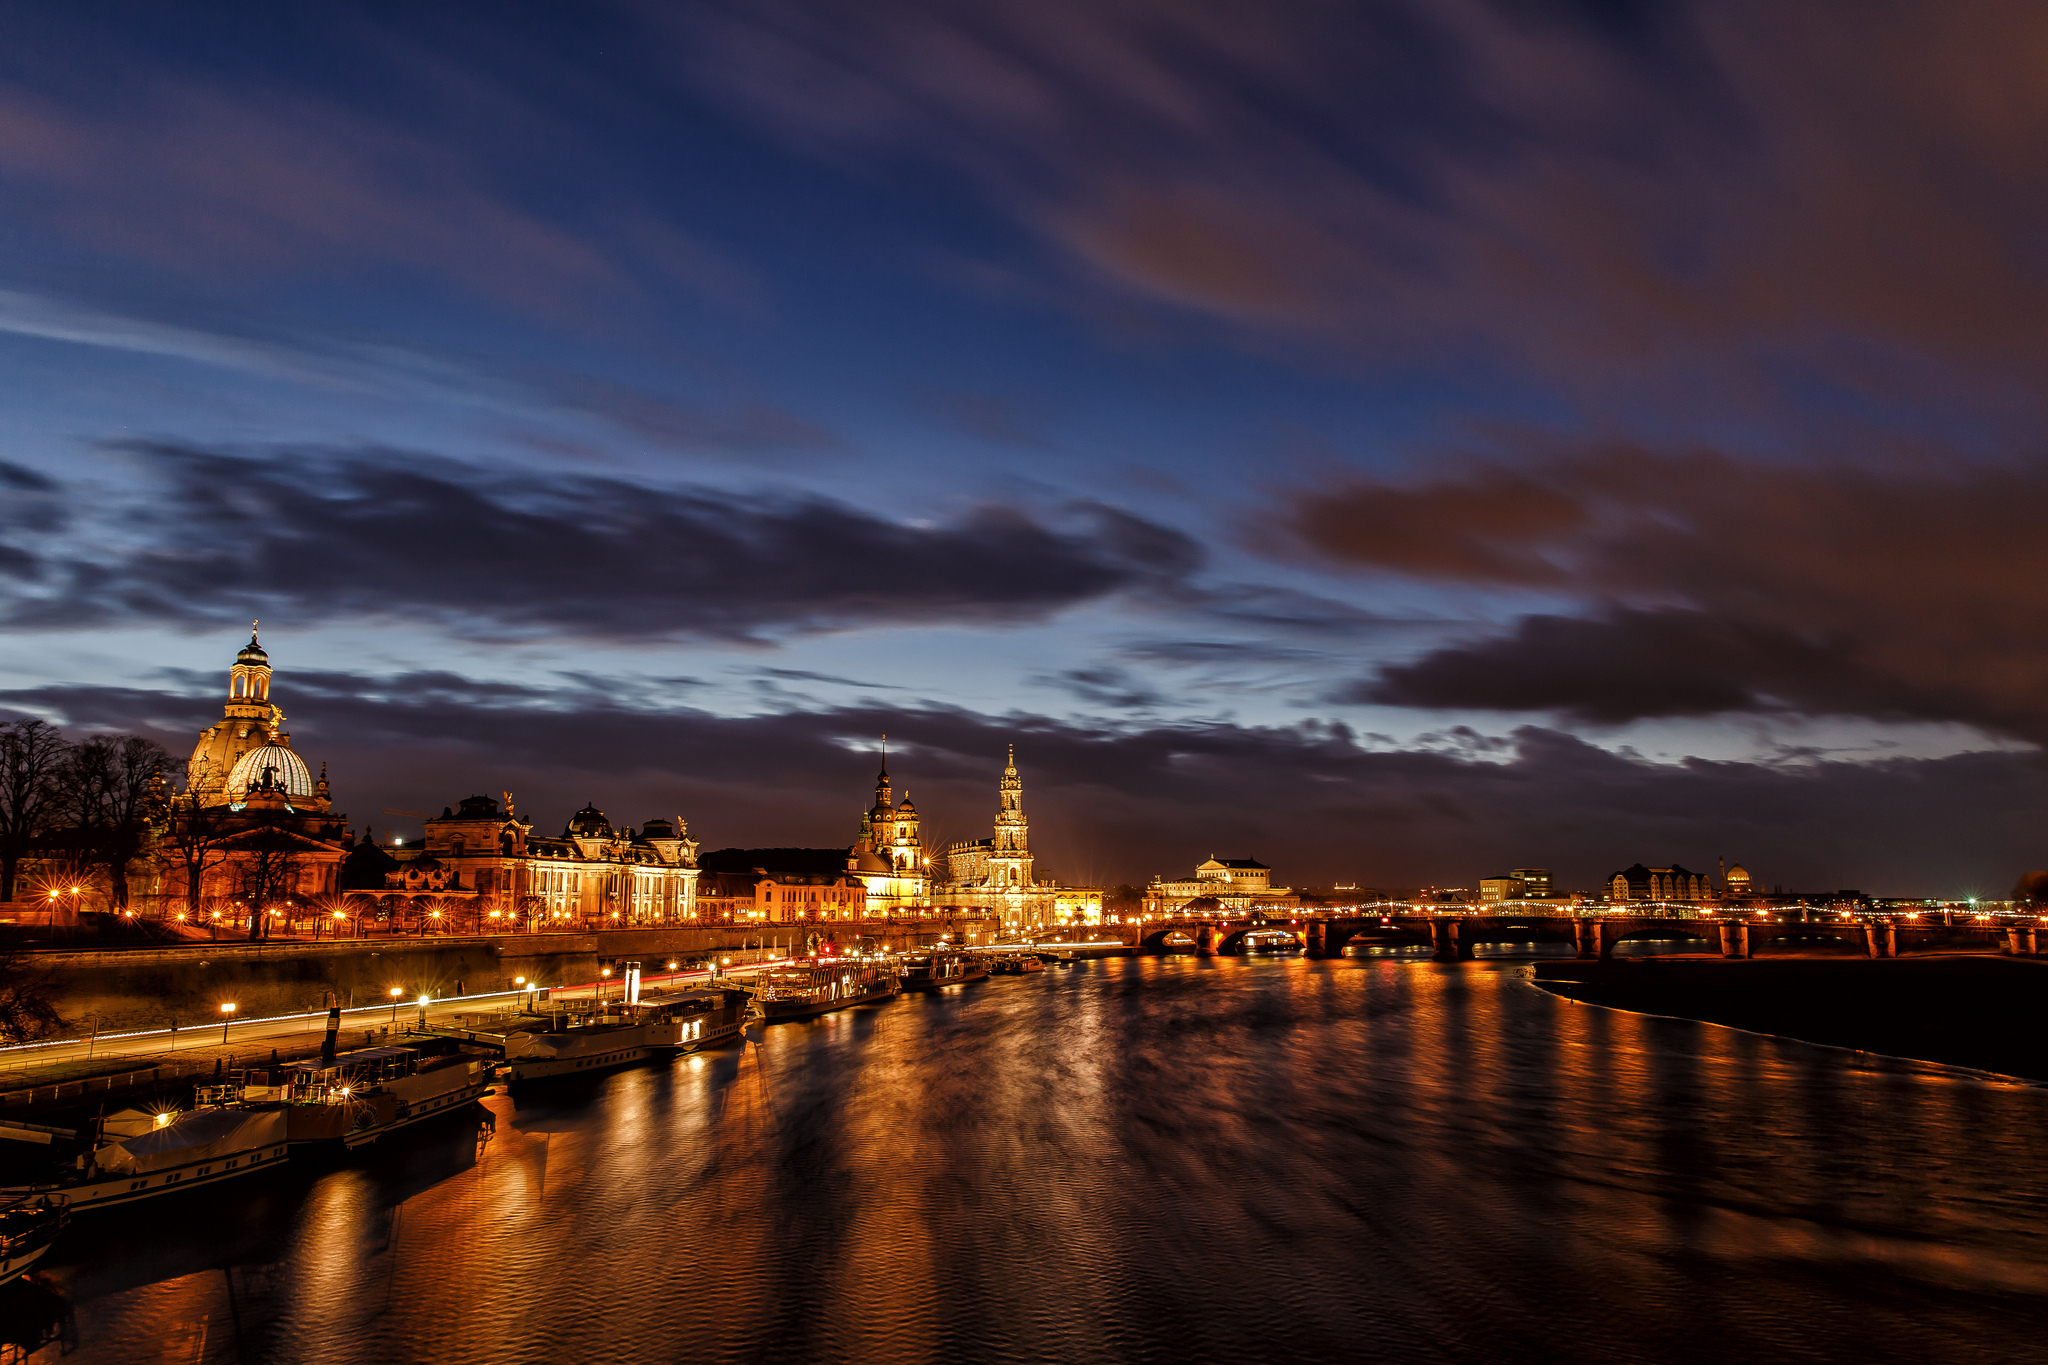 dresden, man made, building, city, cloud, germany, light, night, river, cities